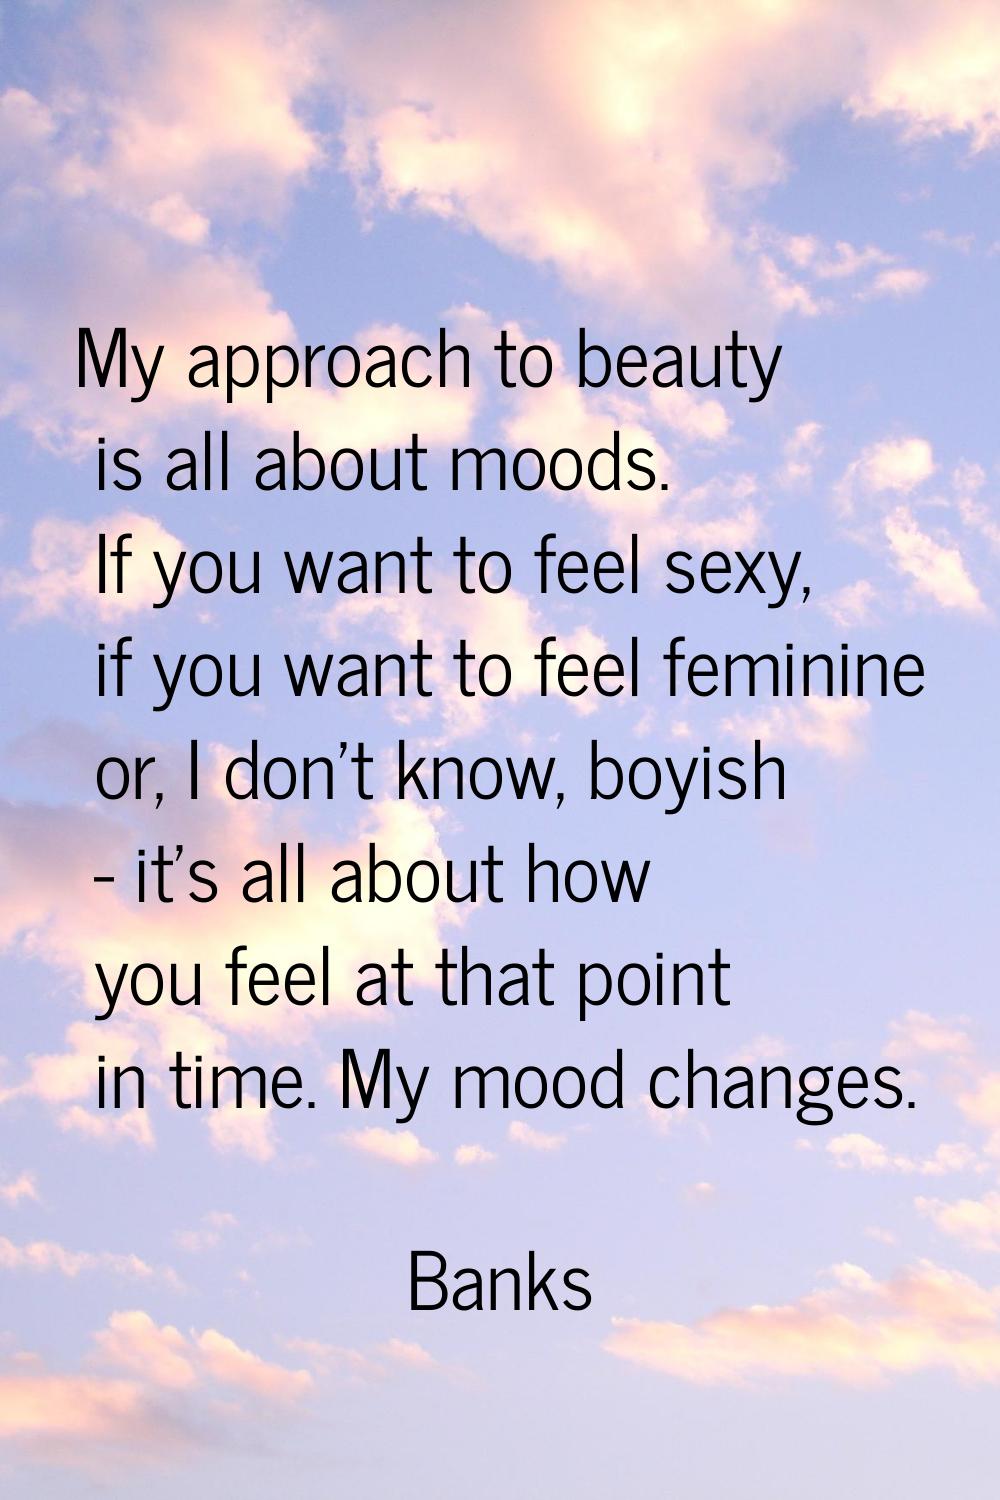 My approach to beauty is all about moods. If you want to feel sexy, if you want to feel feminine or